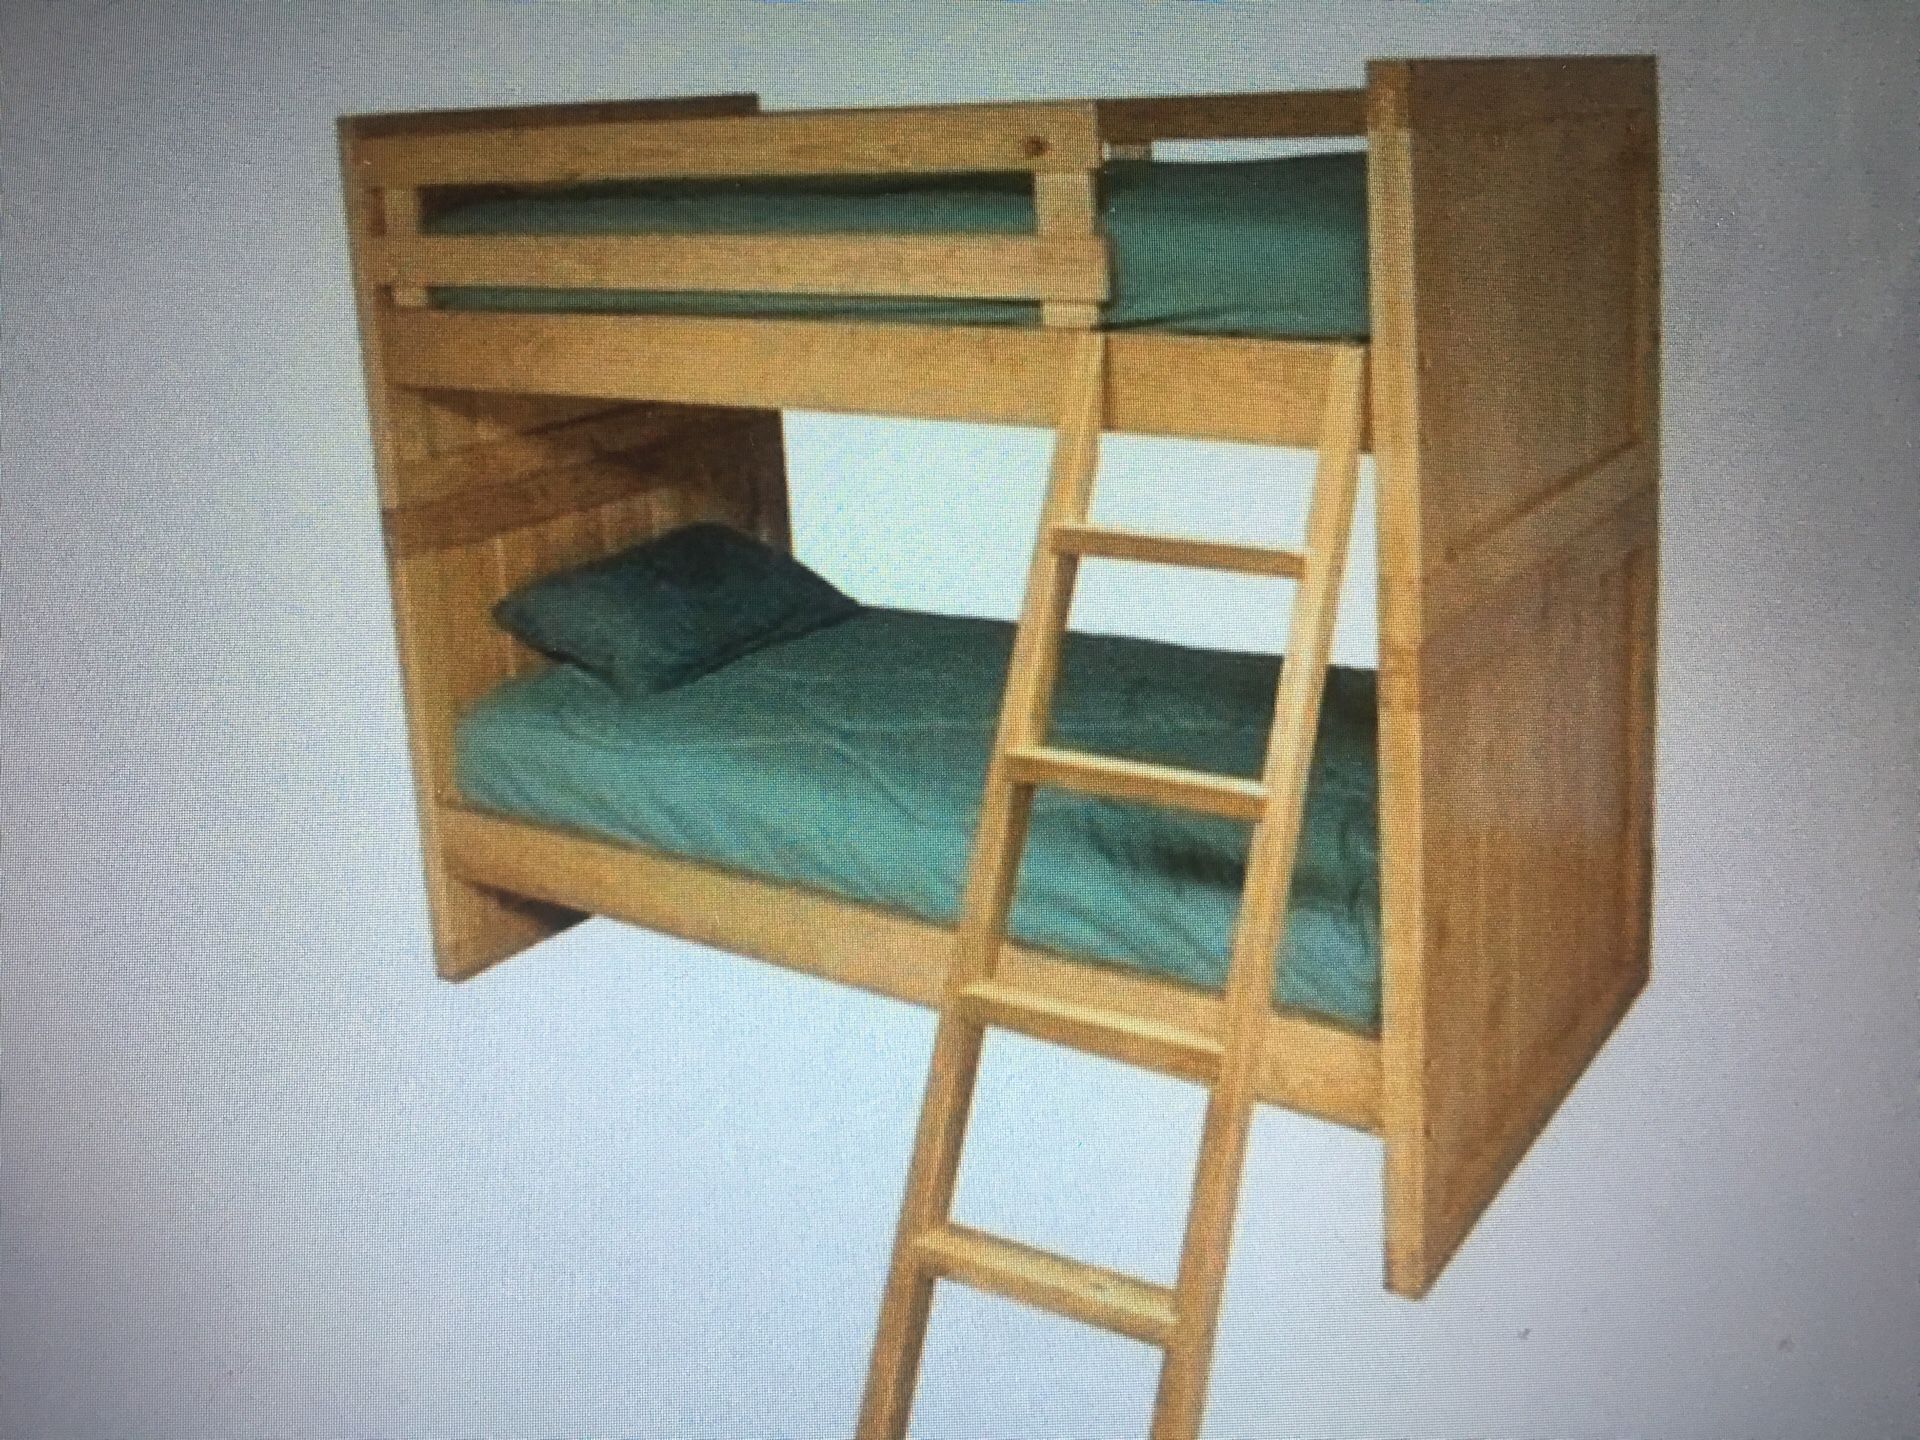 Original cargo-. Bunk beds with ladder a desk and side table